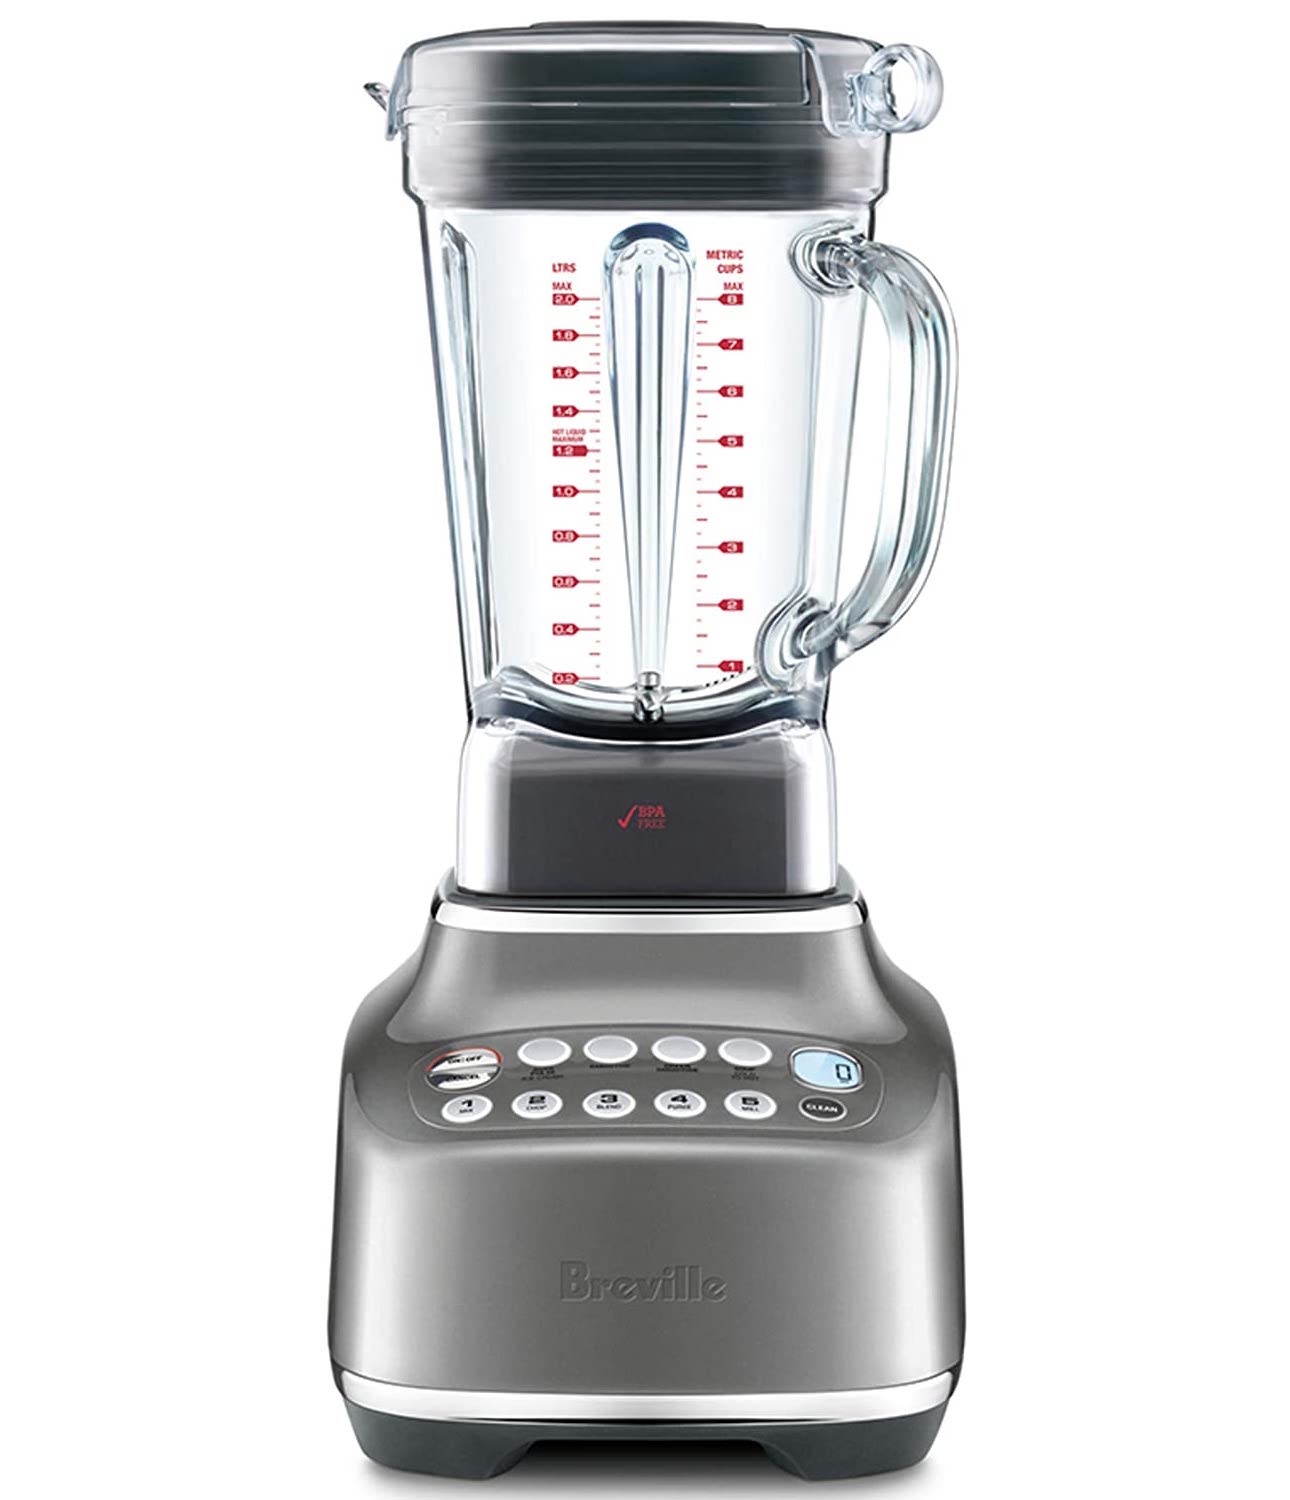 Breville Is Slinging Deals on Everything From Coffee Machines To Juicers